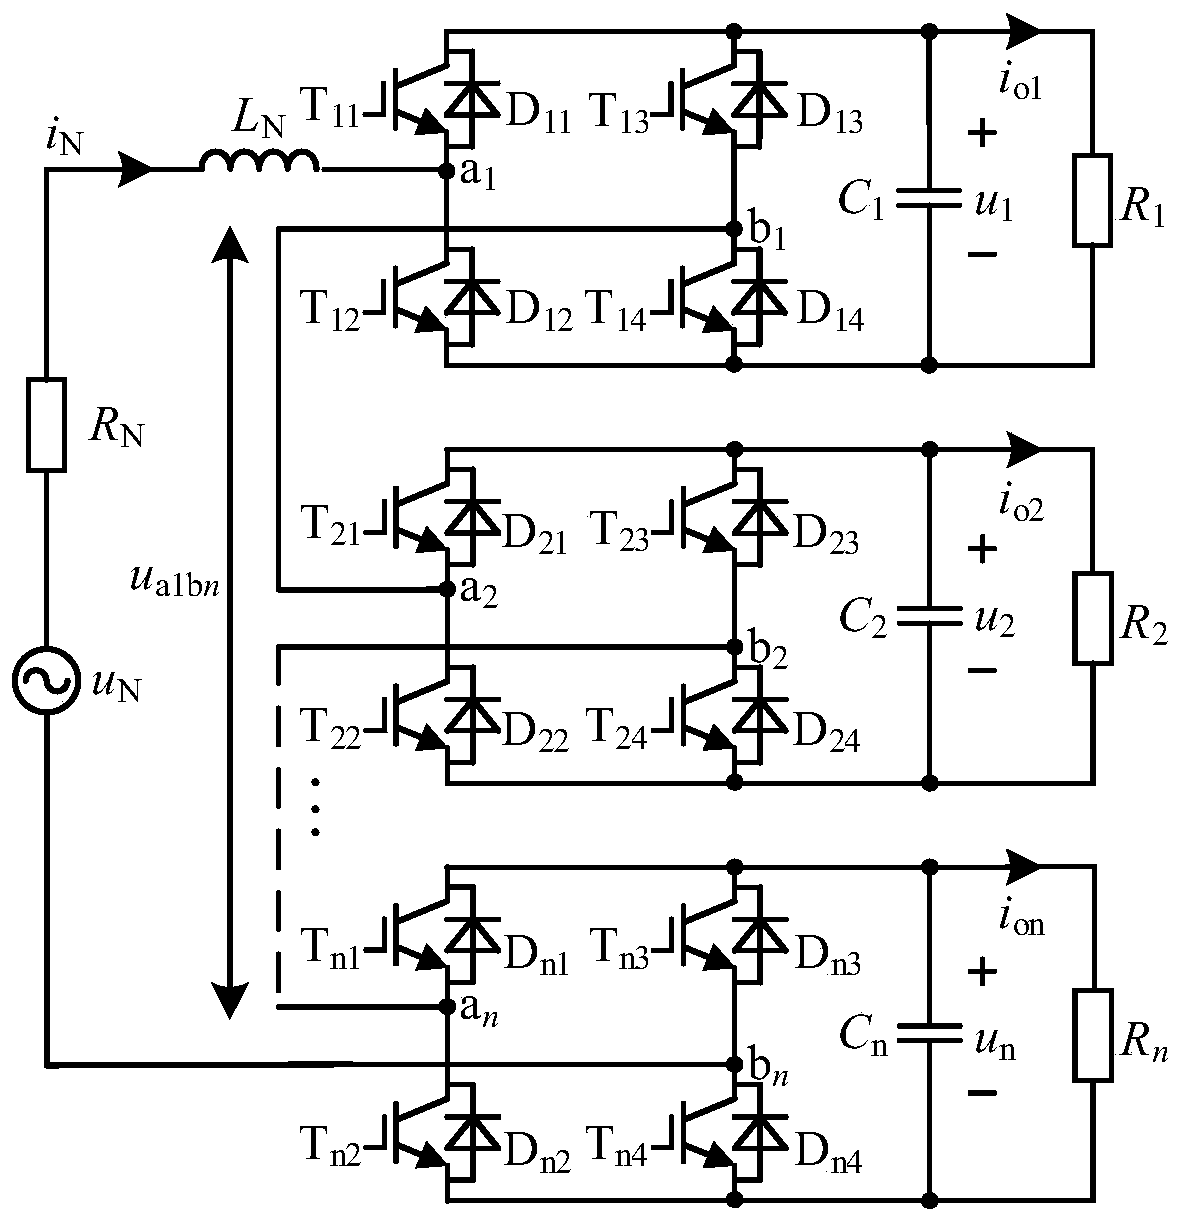 Open-circuit fault diagnosis method for switch tubes of single-phase cascaded H-bridge rectifier